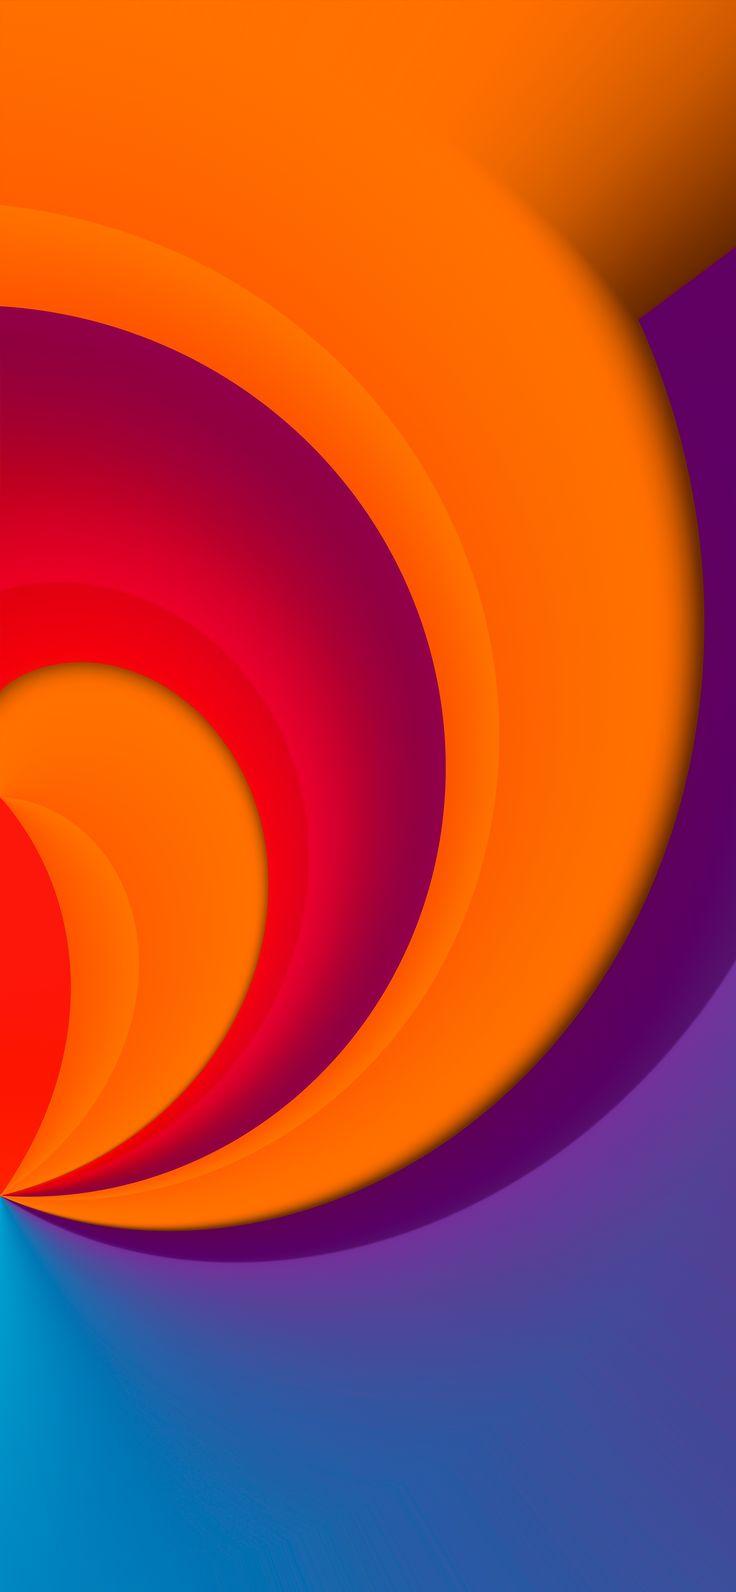 iOS Beta swoops of orange and pruple by Hk3ToN Iphone